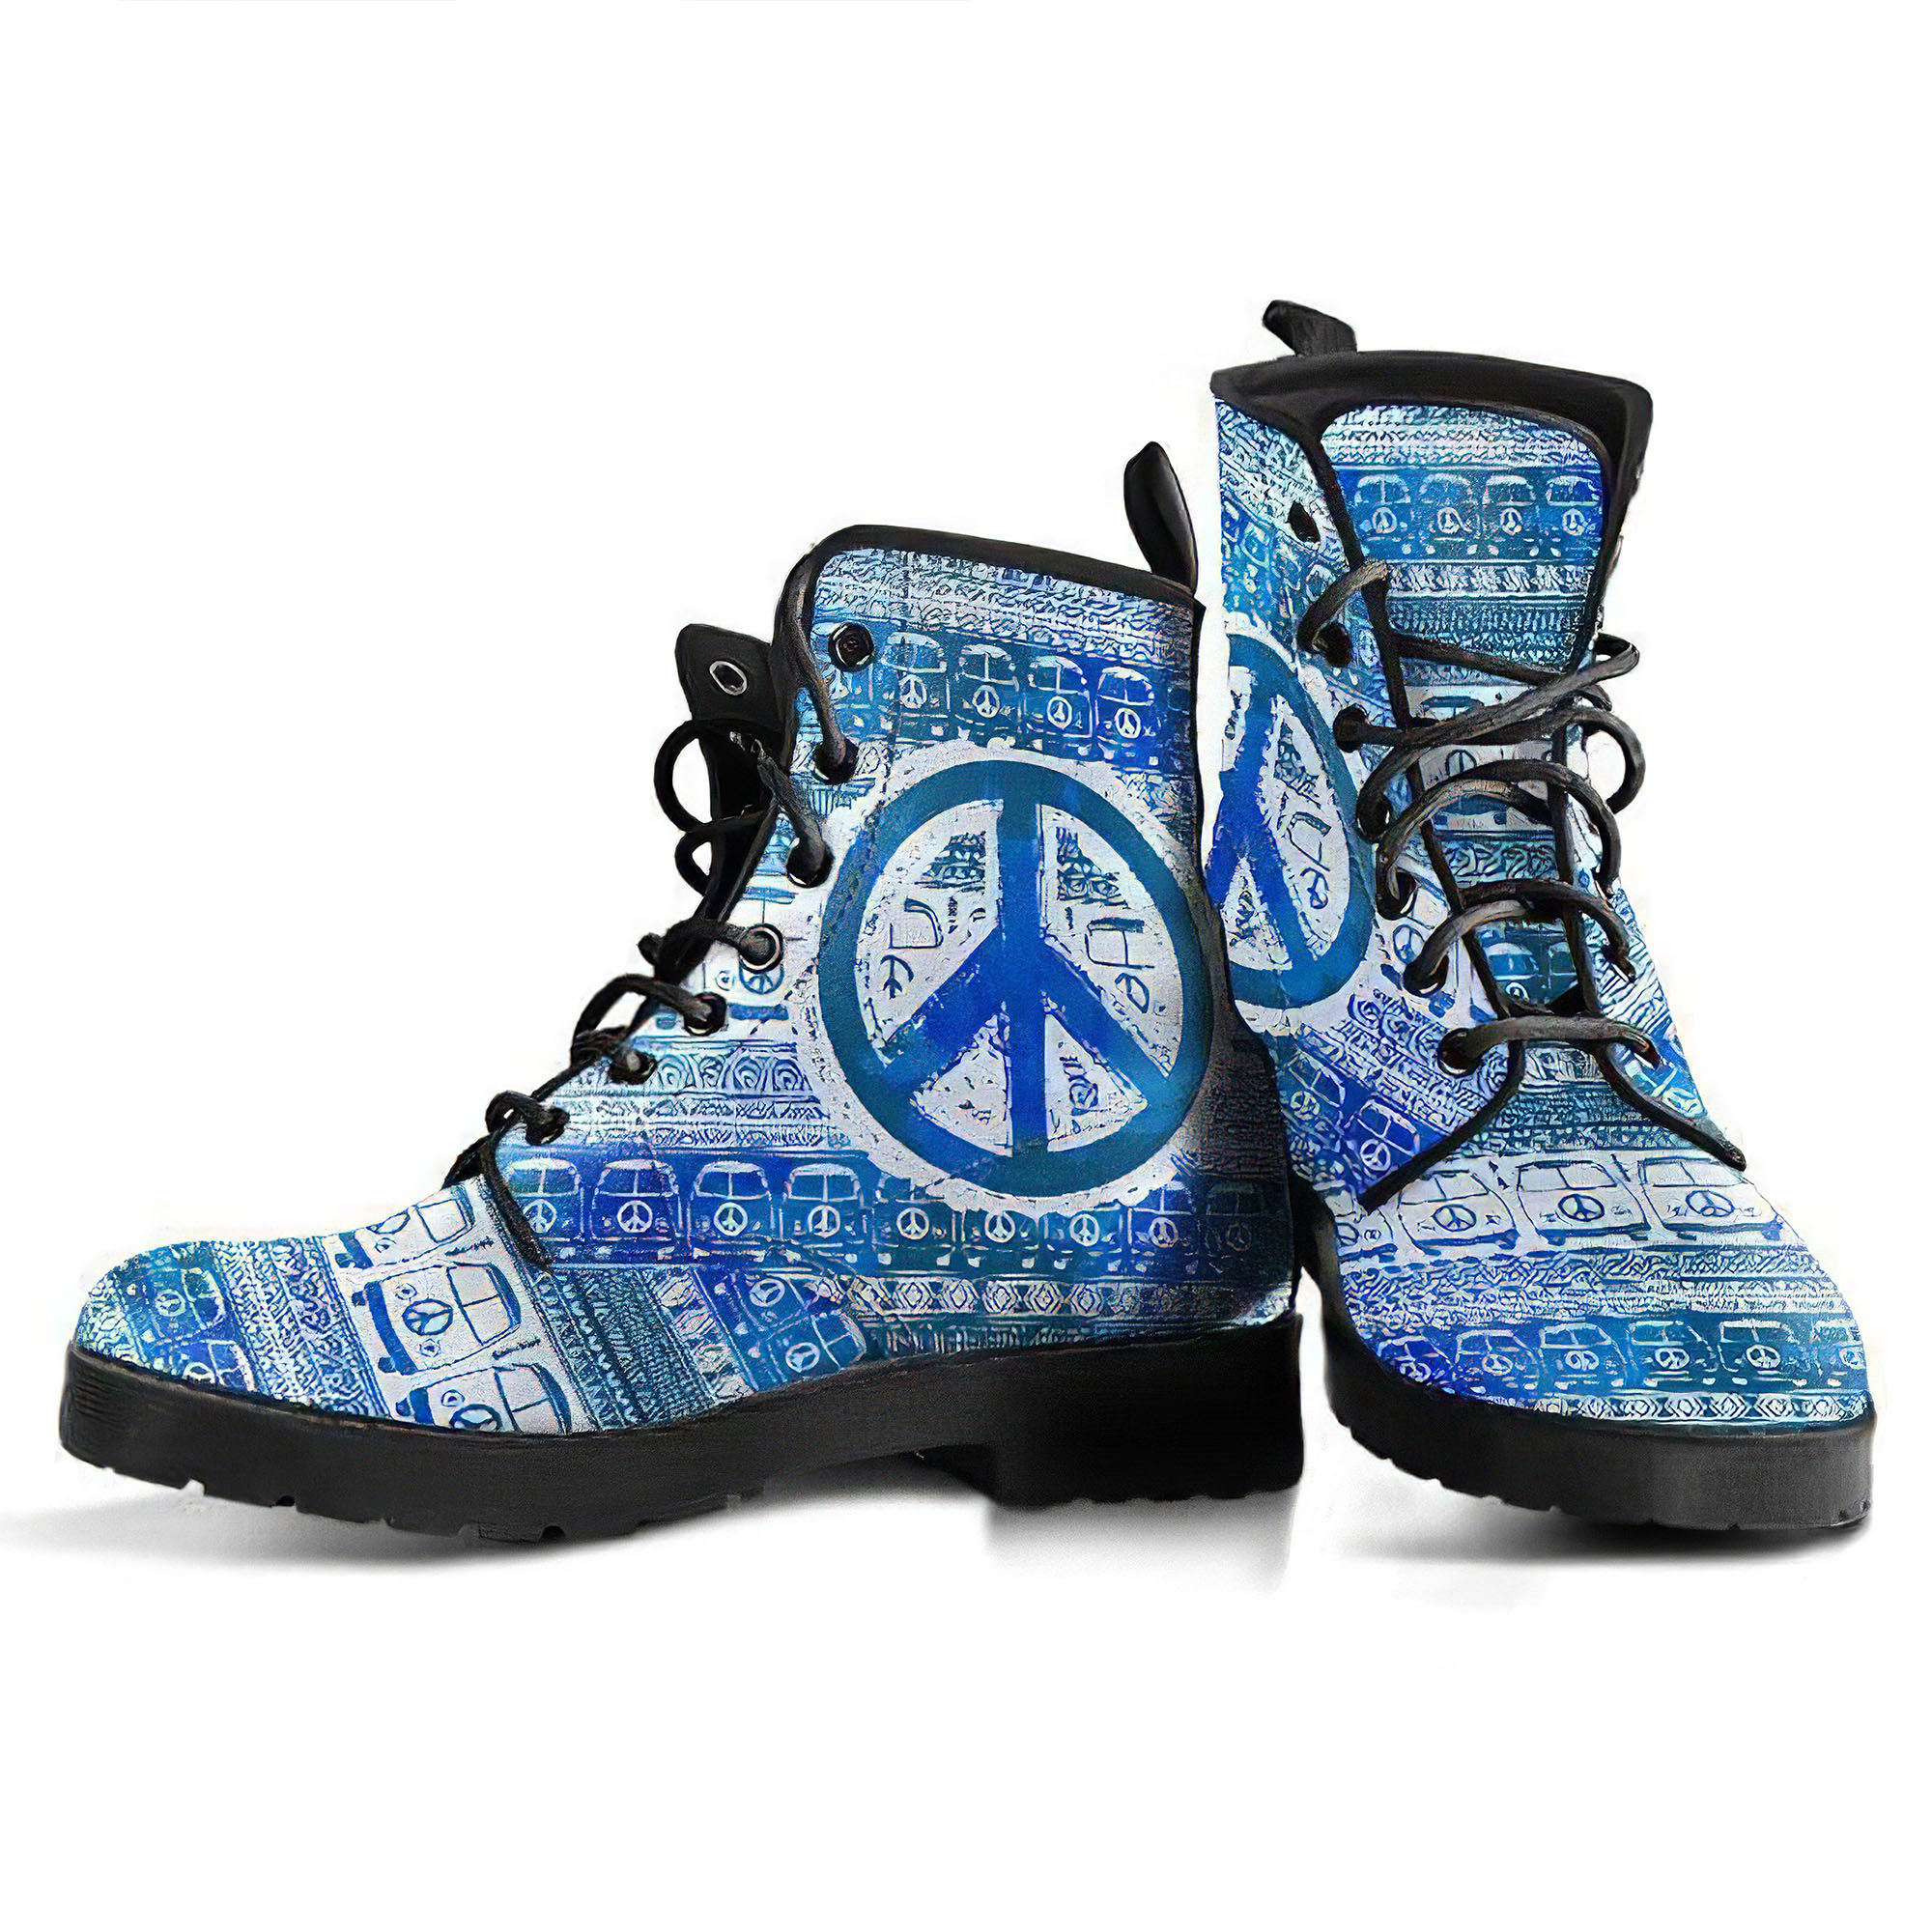 bus-and-hippie-peace-womens-leather-boots-gp-main.jpg